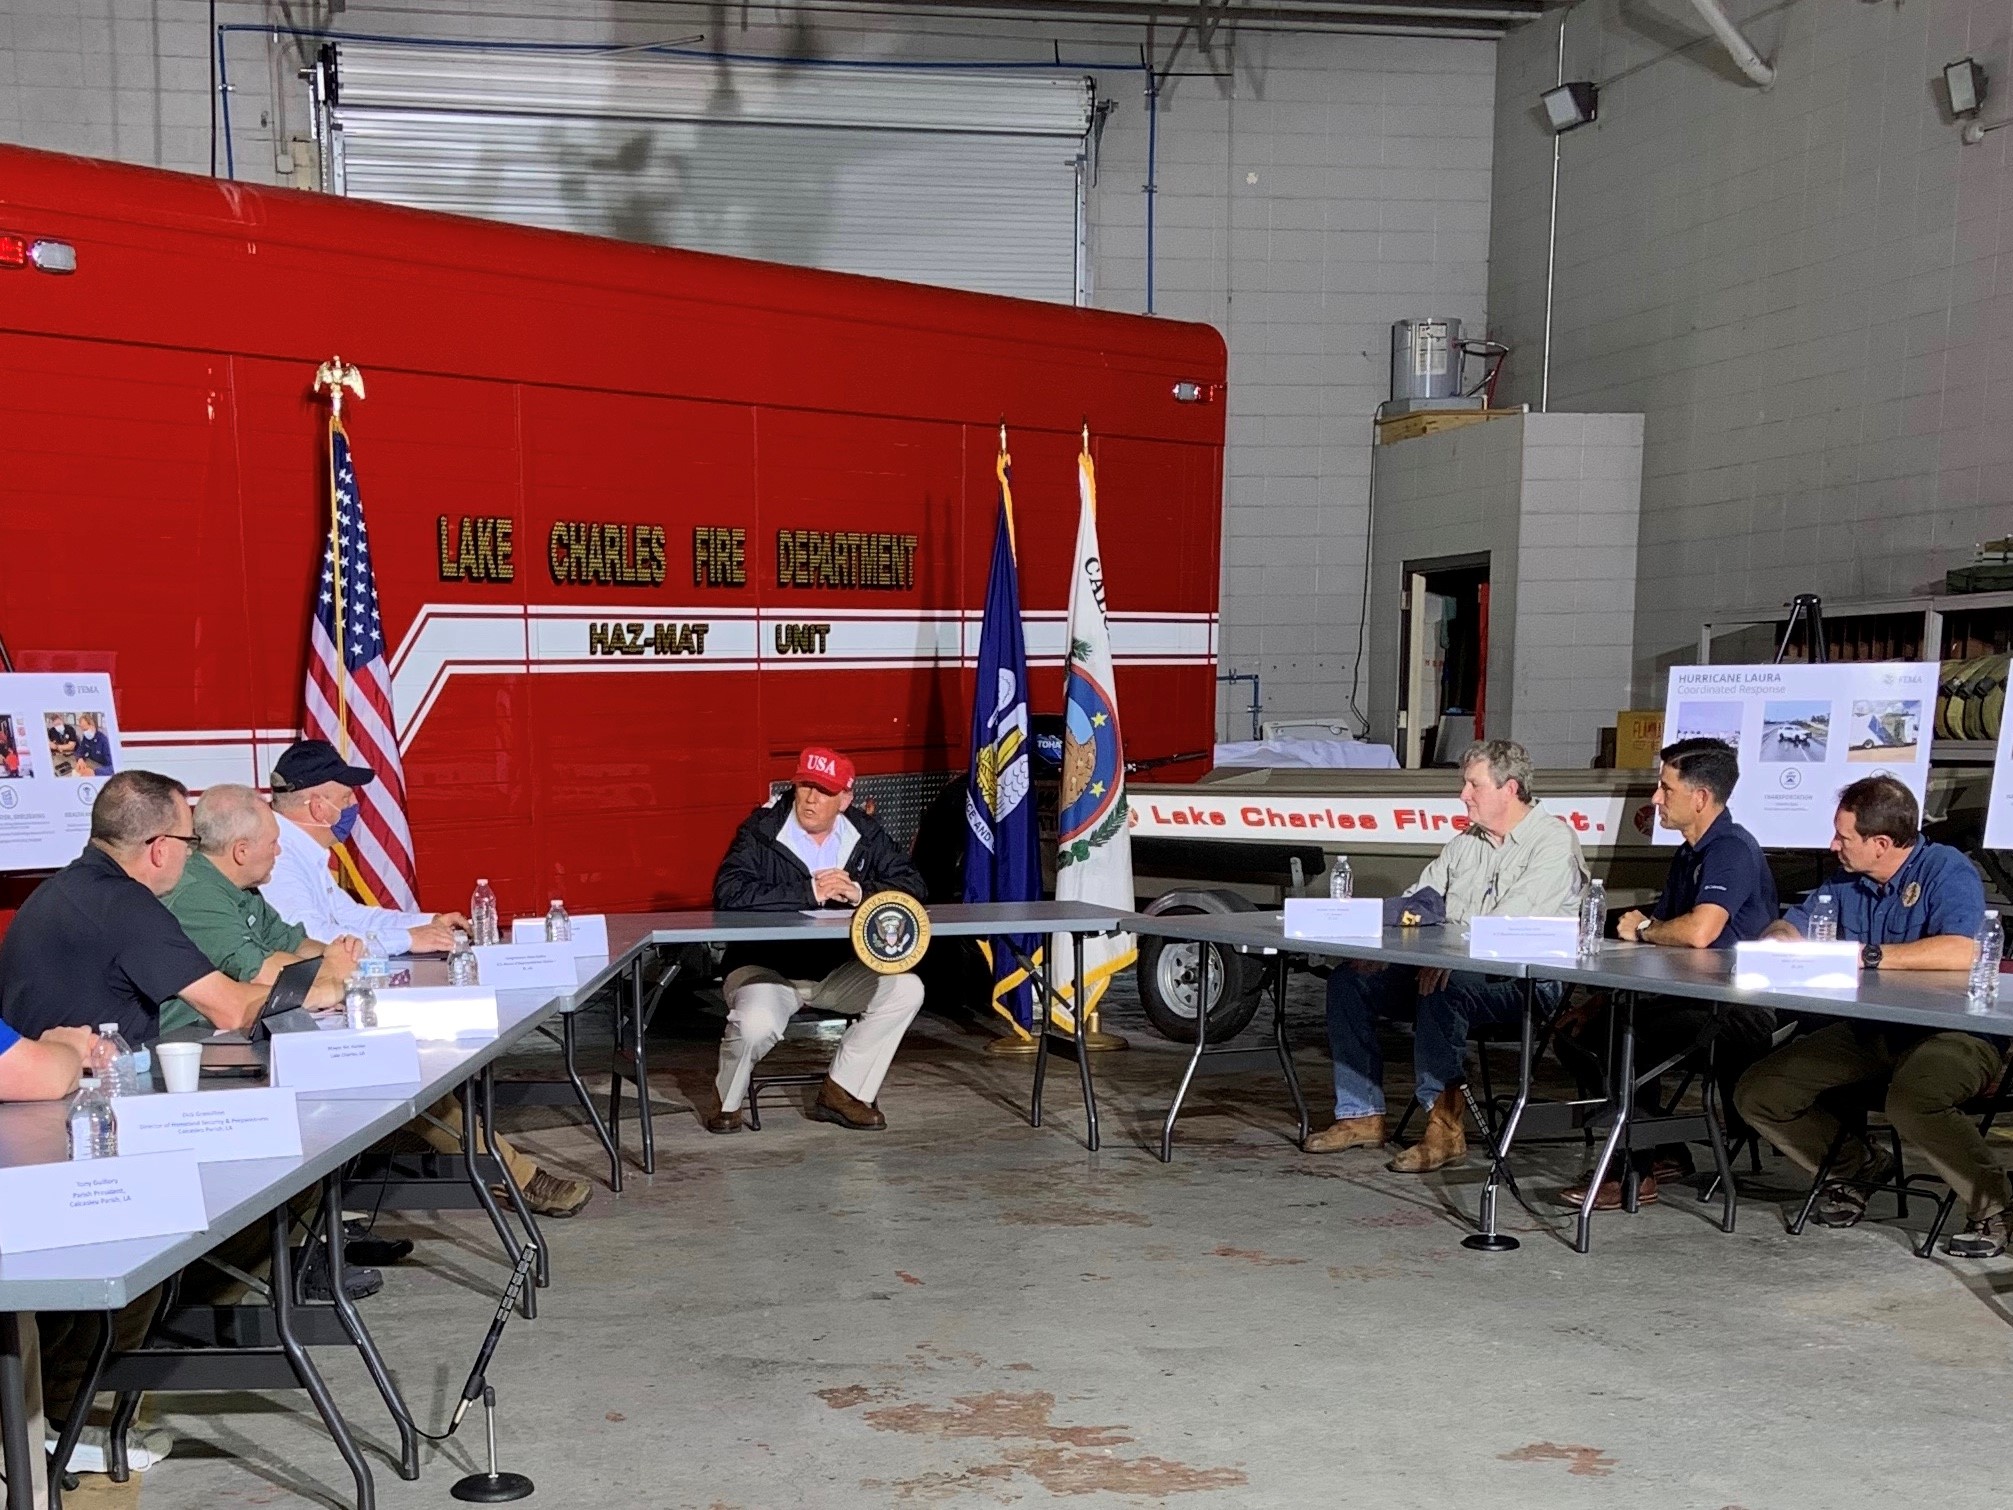 Government officials sitting at two long tables inside a fire station